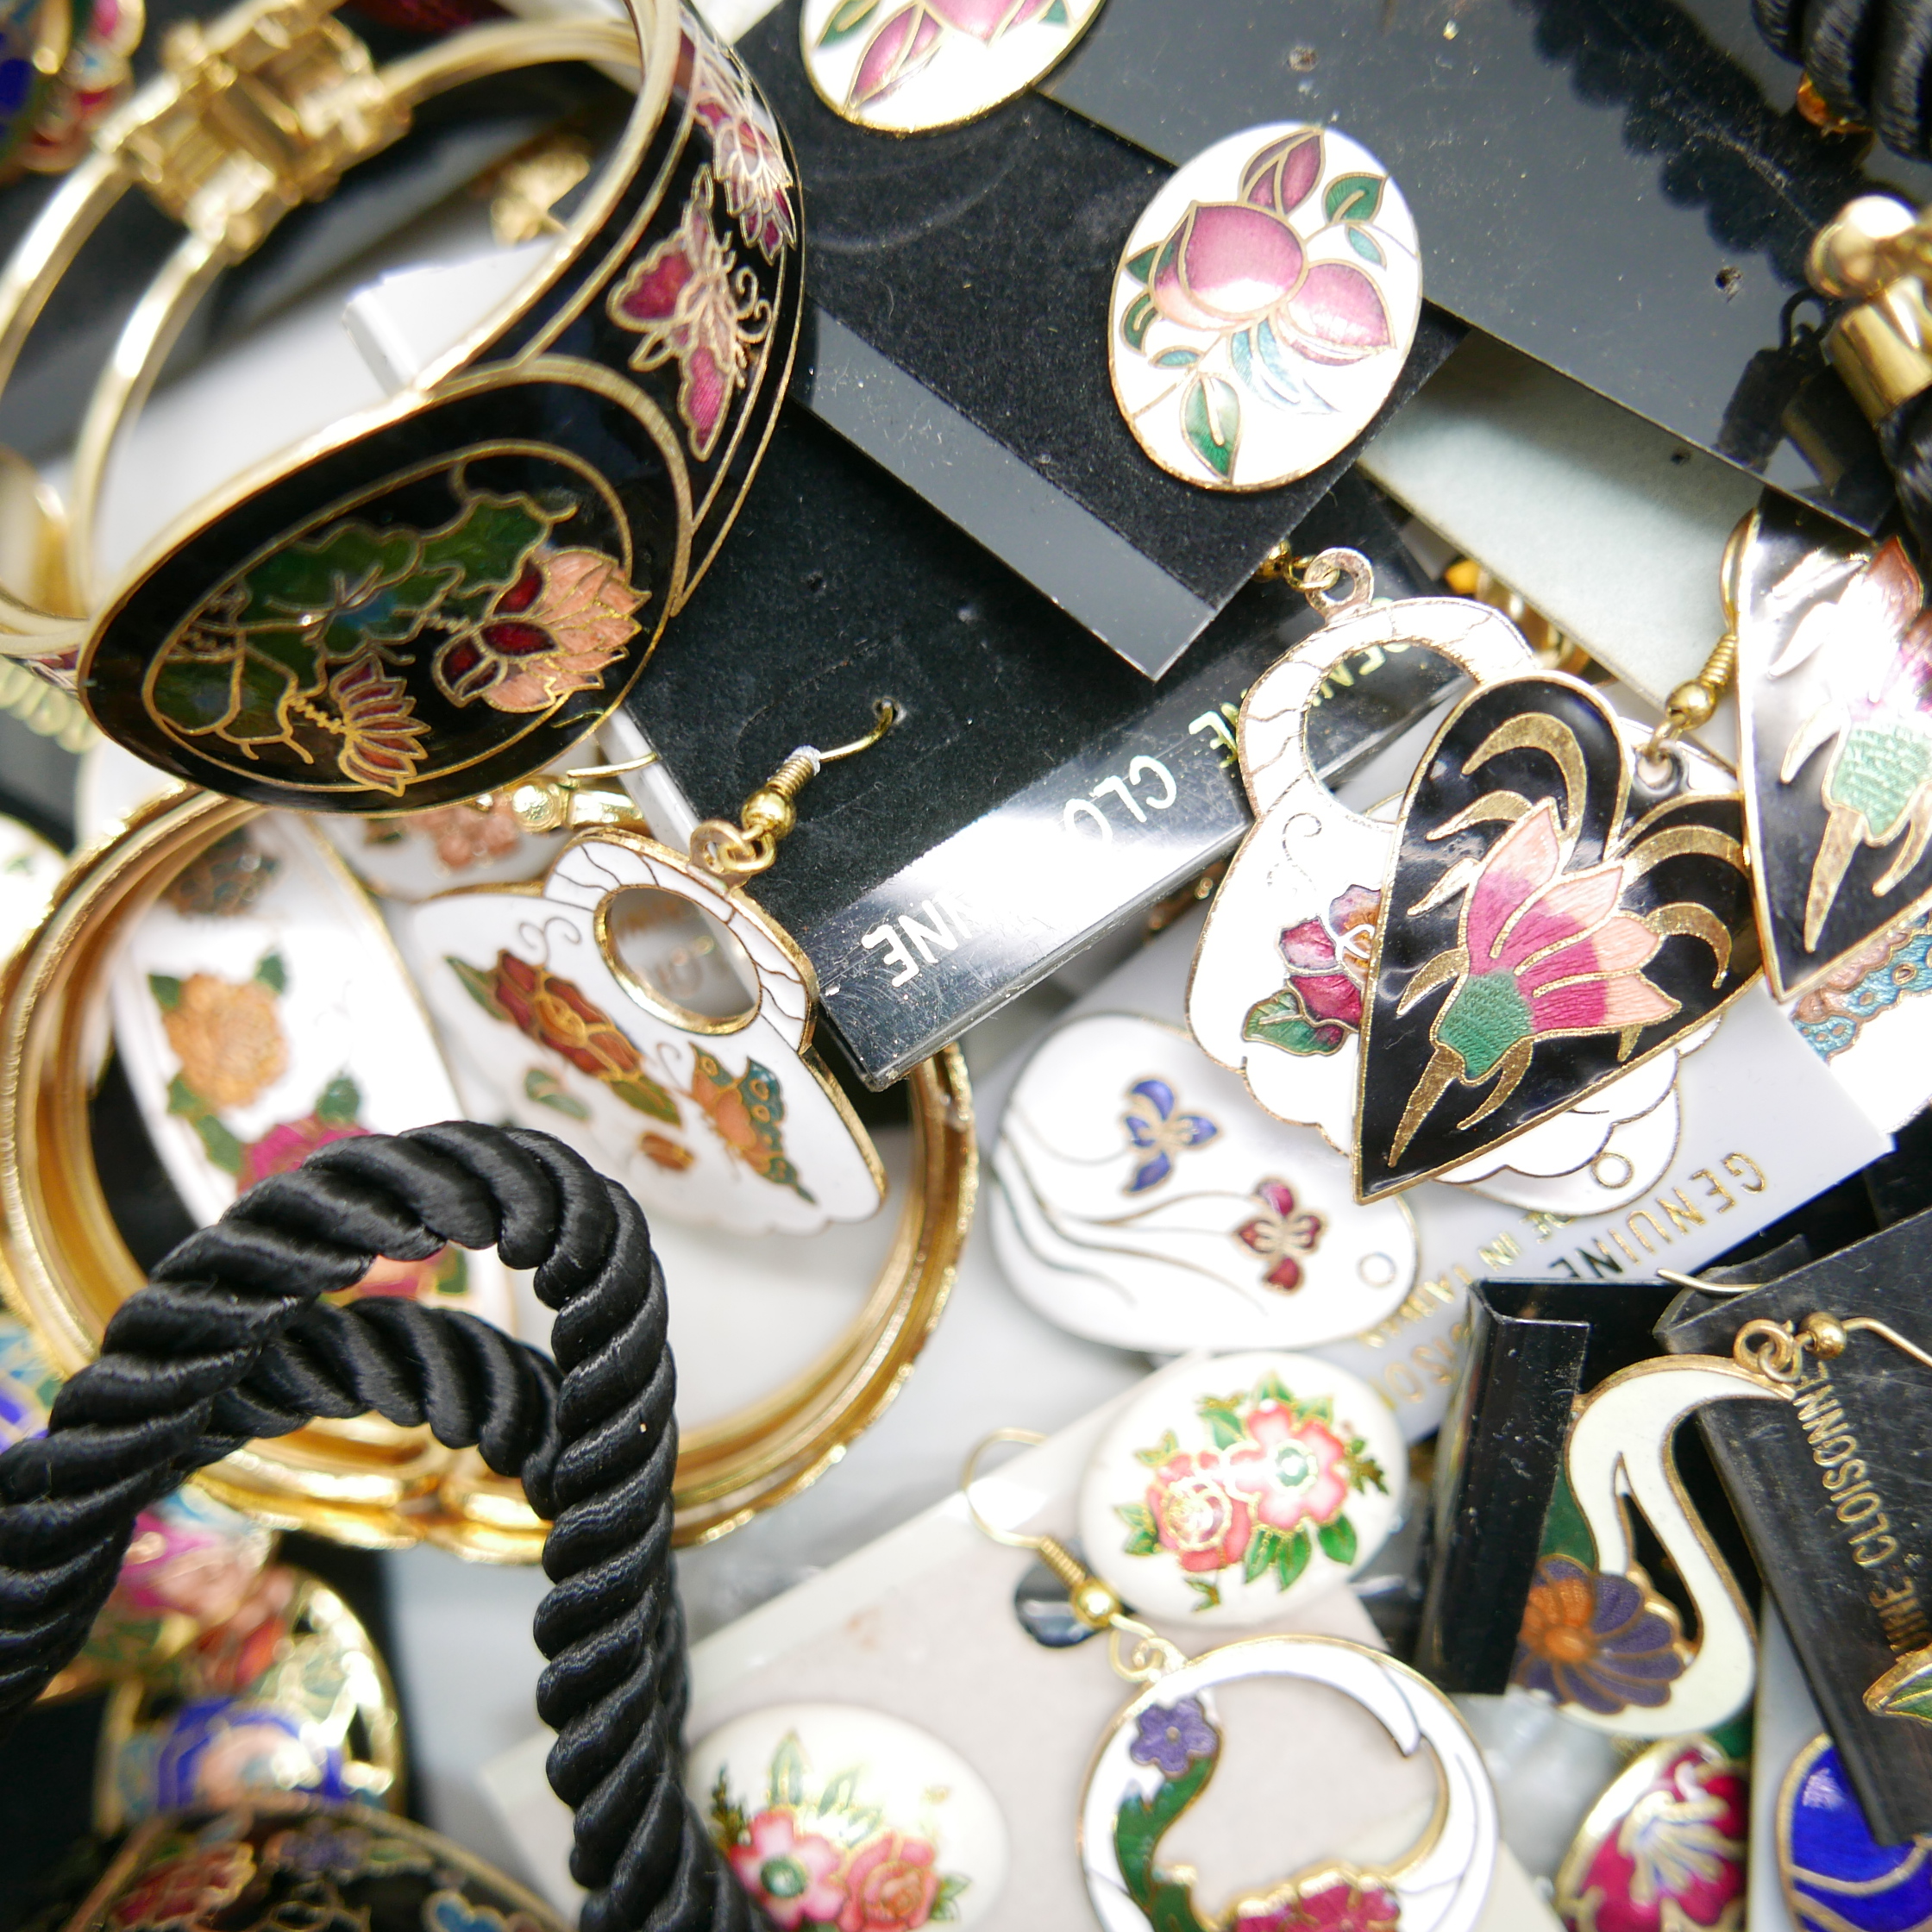 A collection of cloisonne jewellery, bracelets, earrings and necklaces - Image 3 of 3